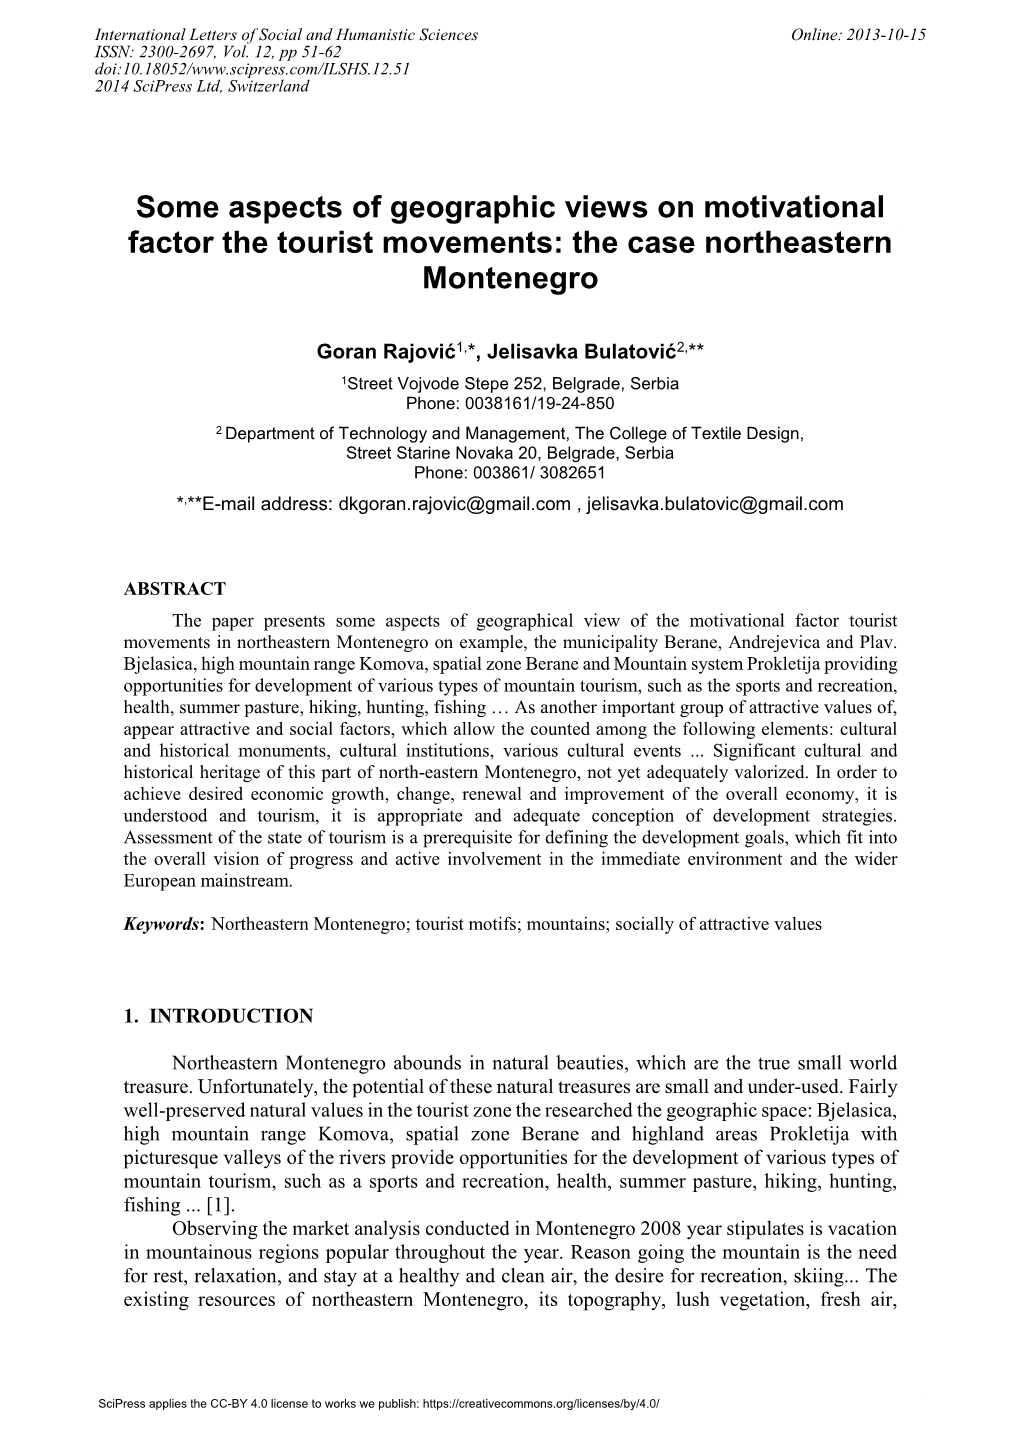 Some Aspects of Geographic Views on Motivational Factor the Tourist Movements: the Case Northeastern Montenegro